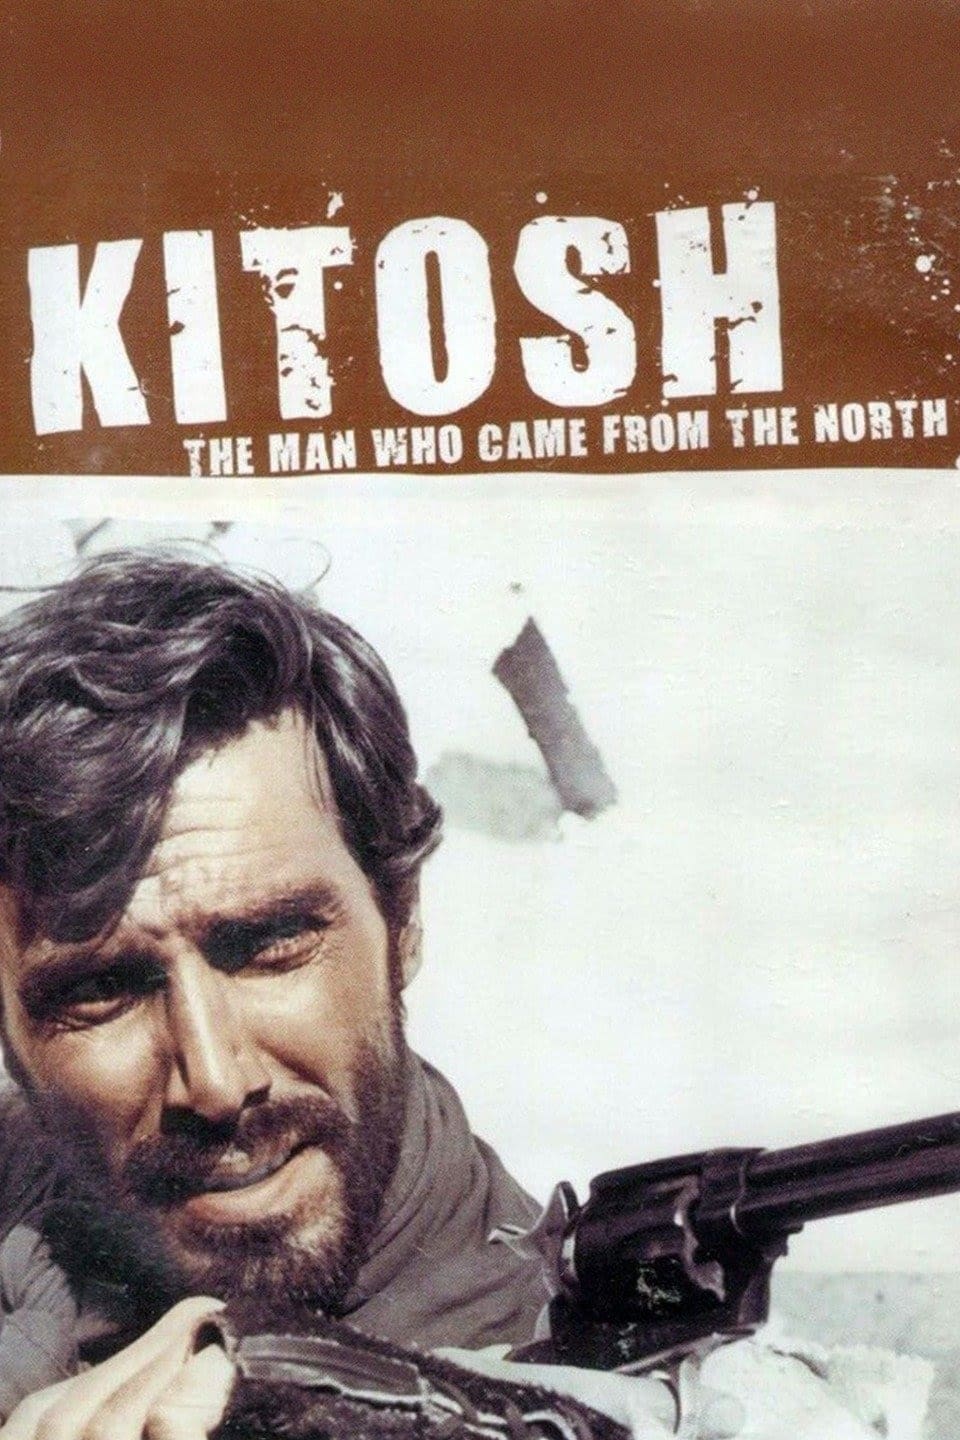 Kitosch, the Man Who Came from the North